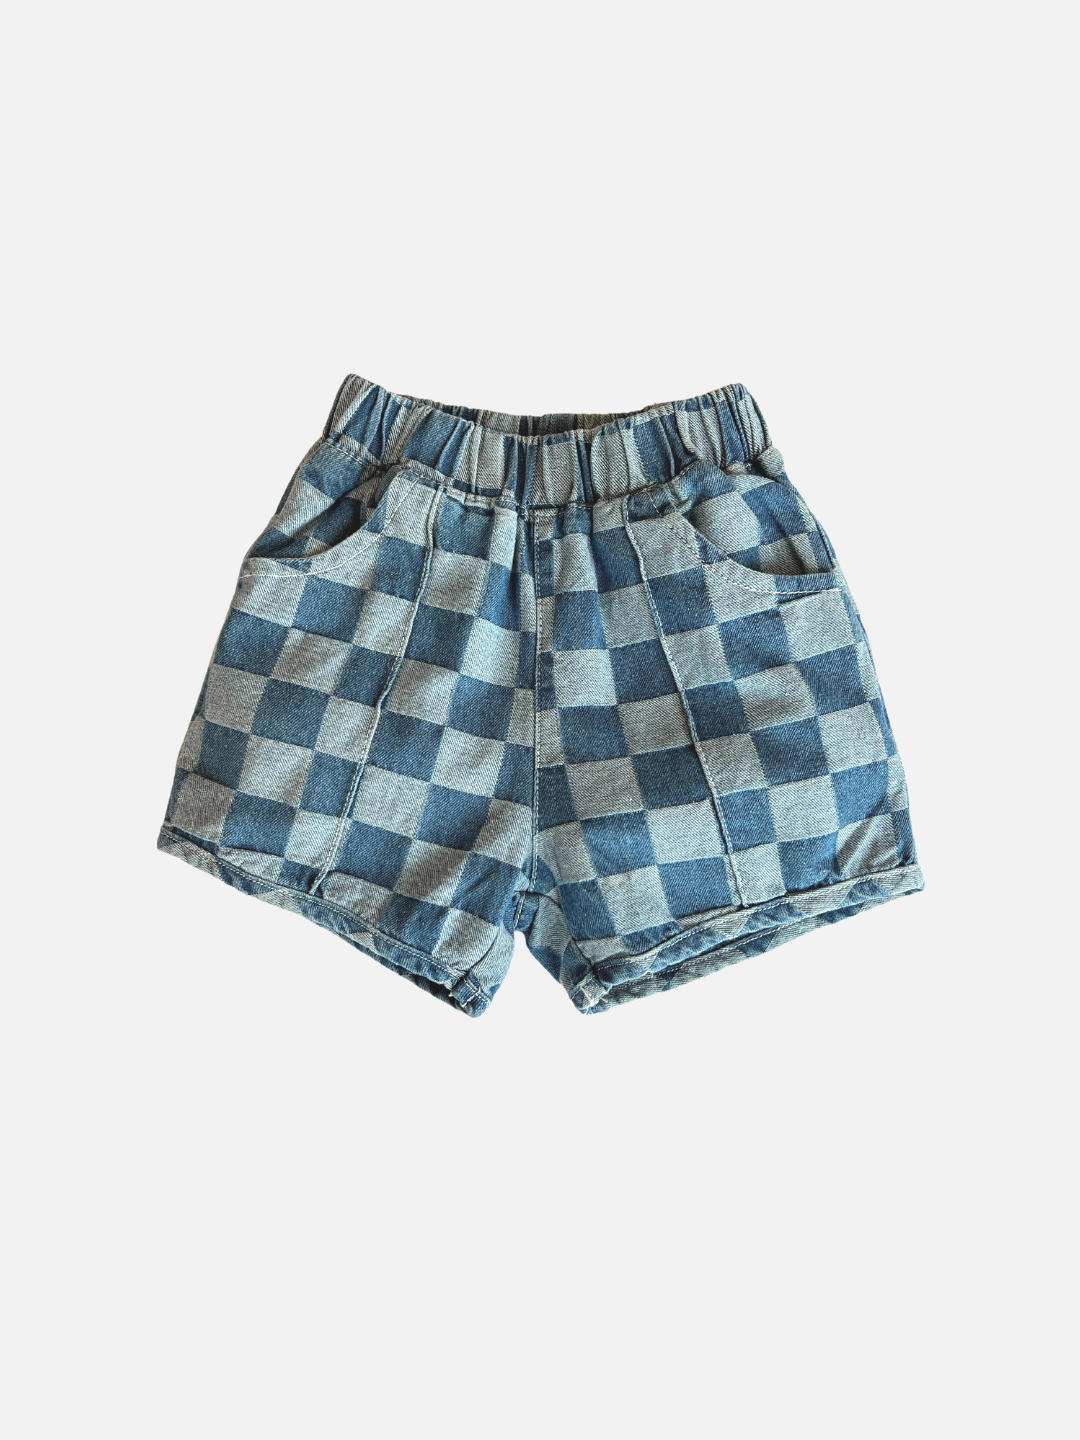 Pair of kids' checkerboard shorts in two shades of blue, front view